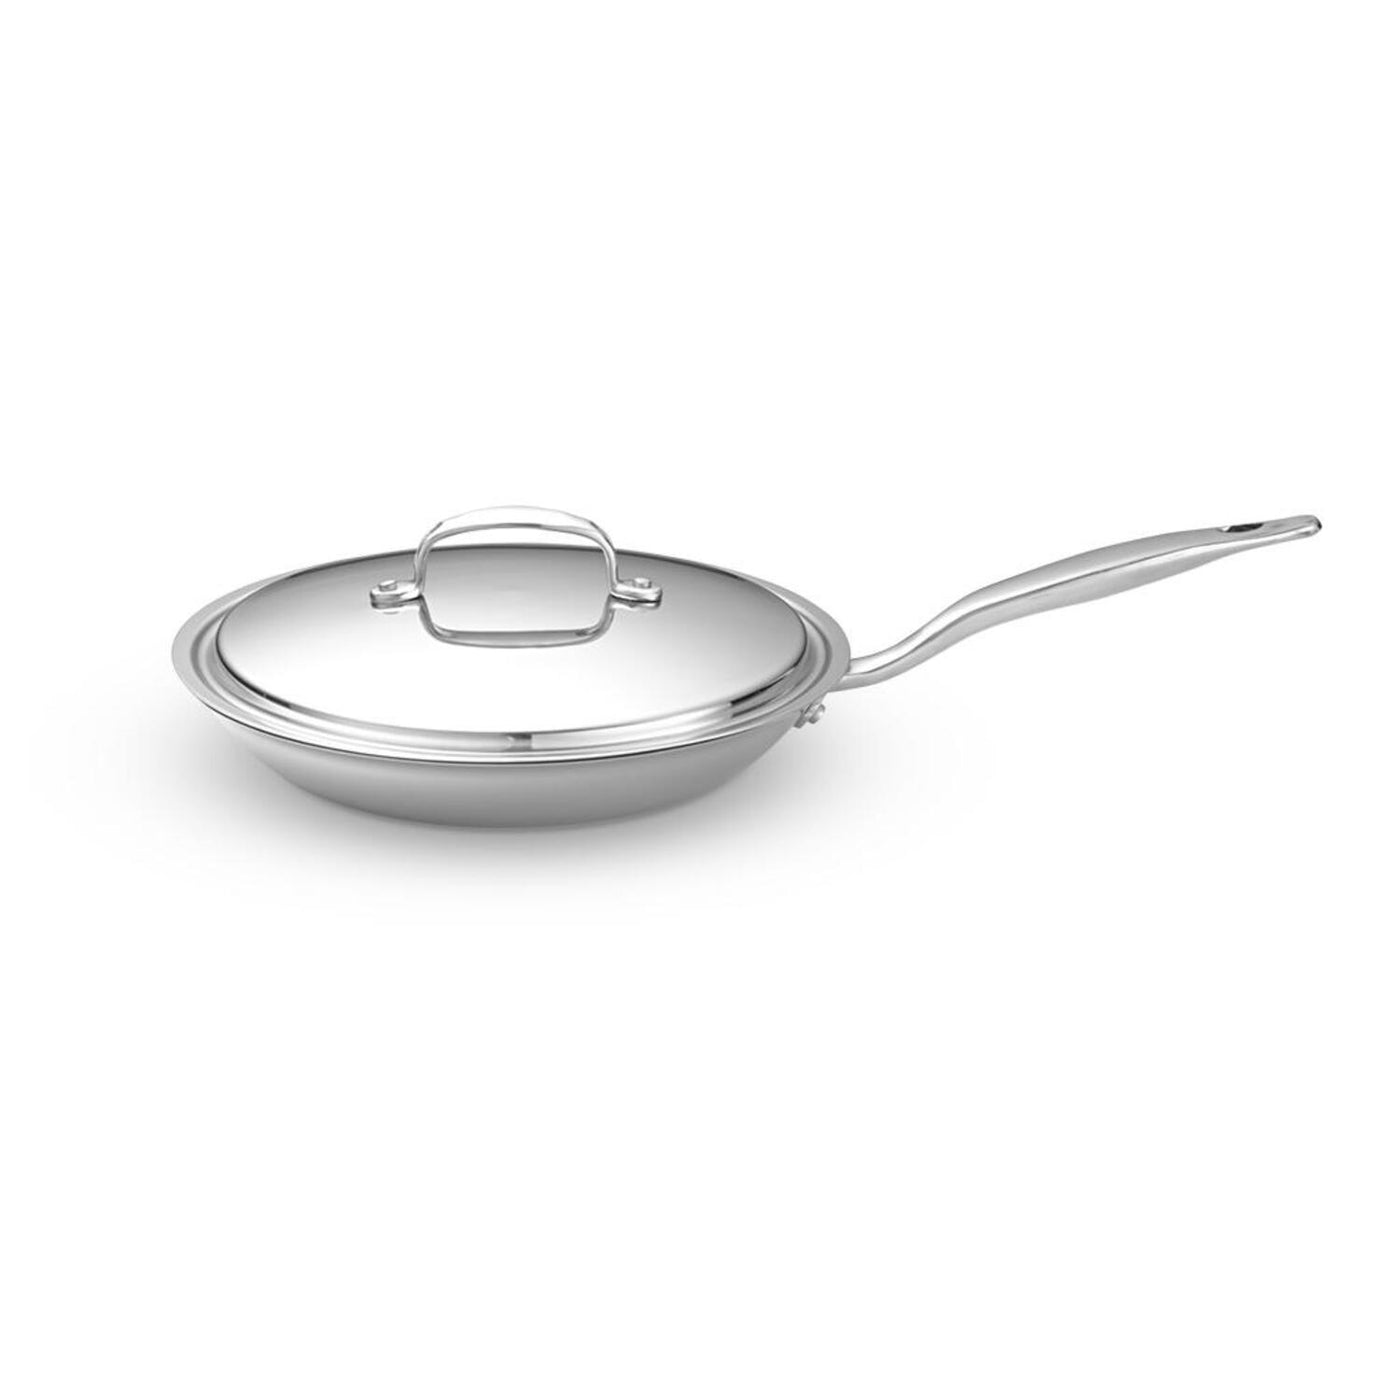 NutriChef 10 in. Ceramic Medium Frying Pan in White with Lid NCHGLDX10 -  The Home Depot